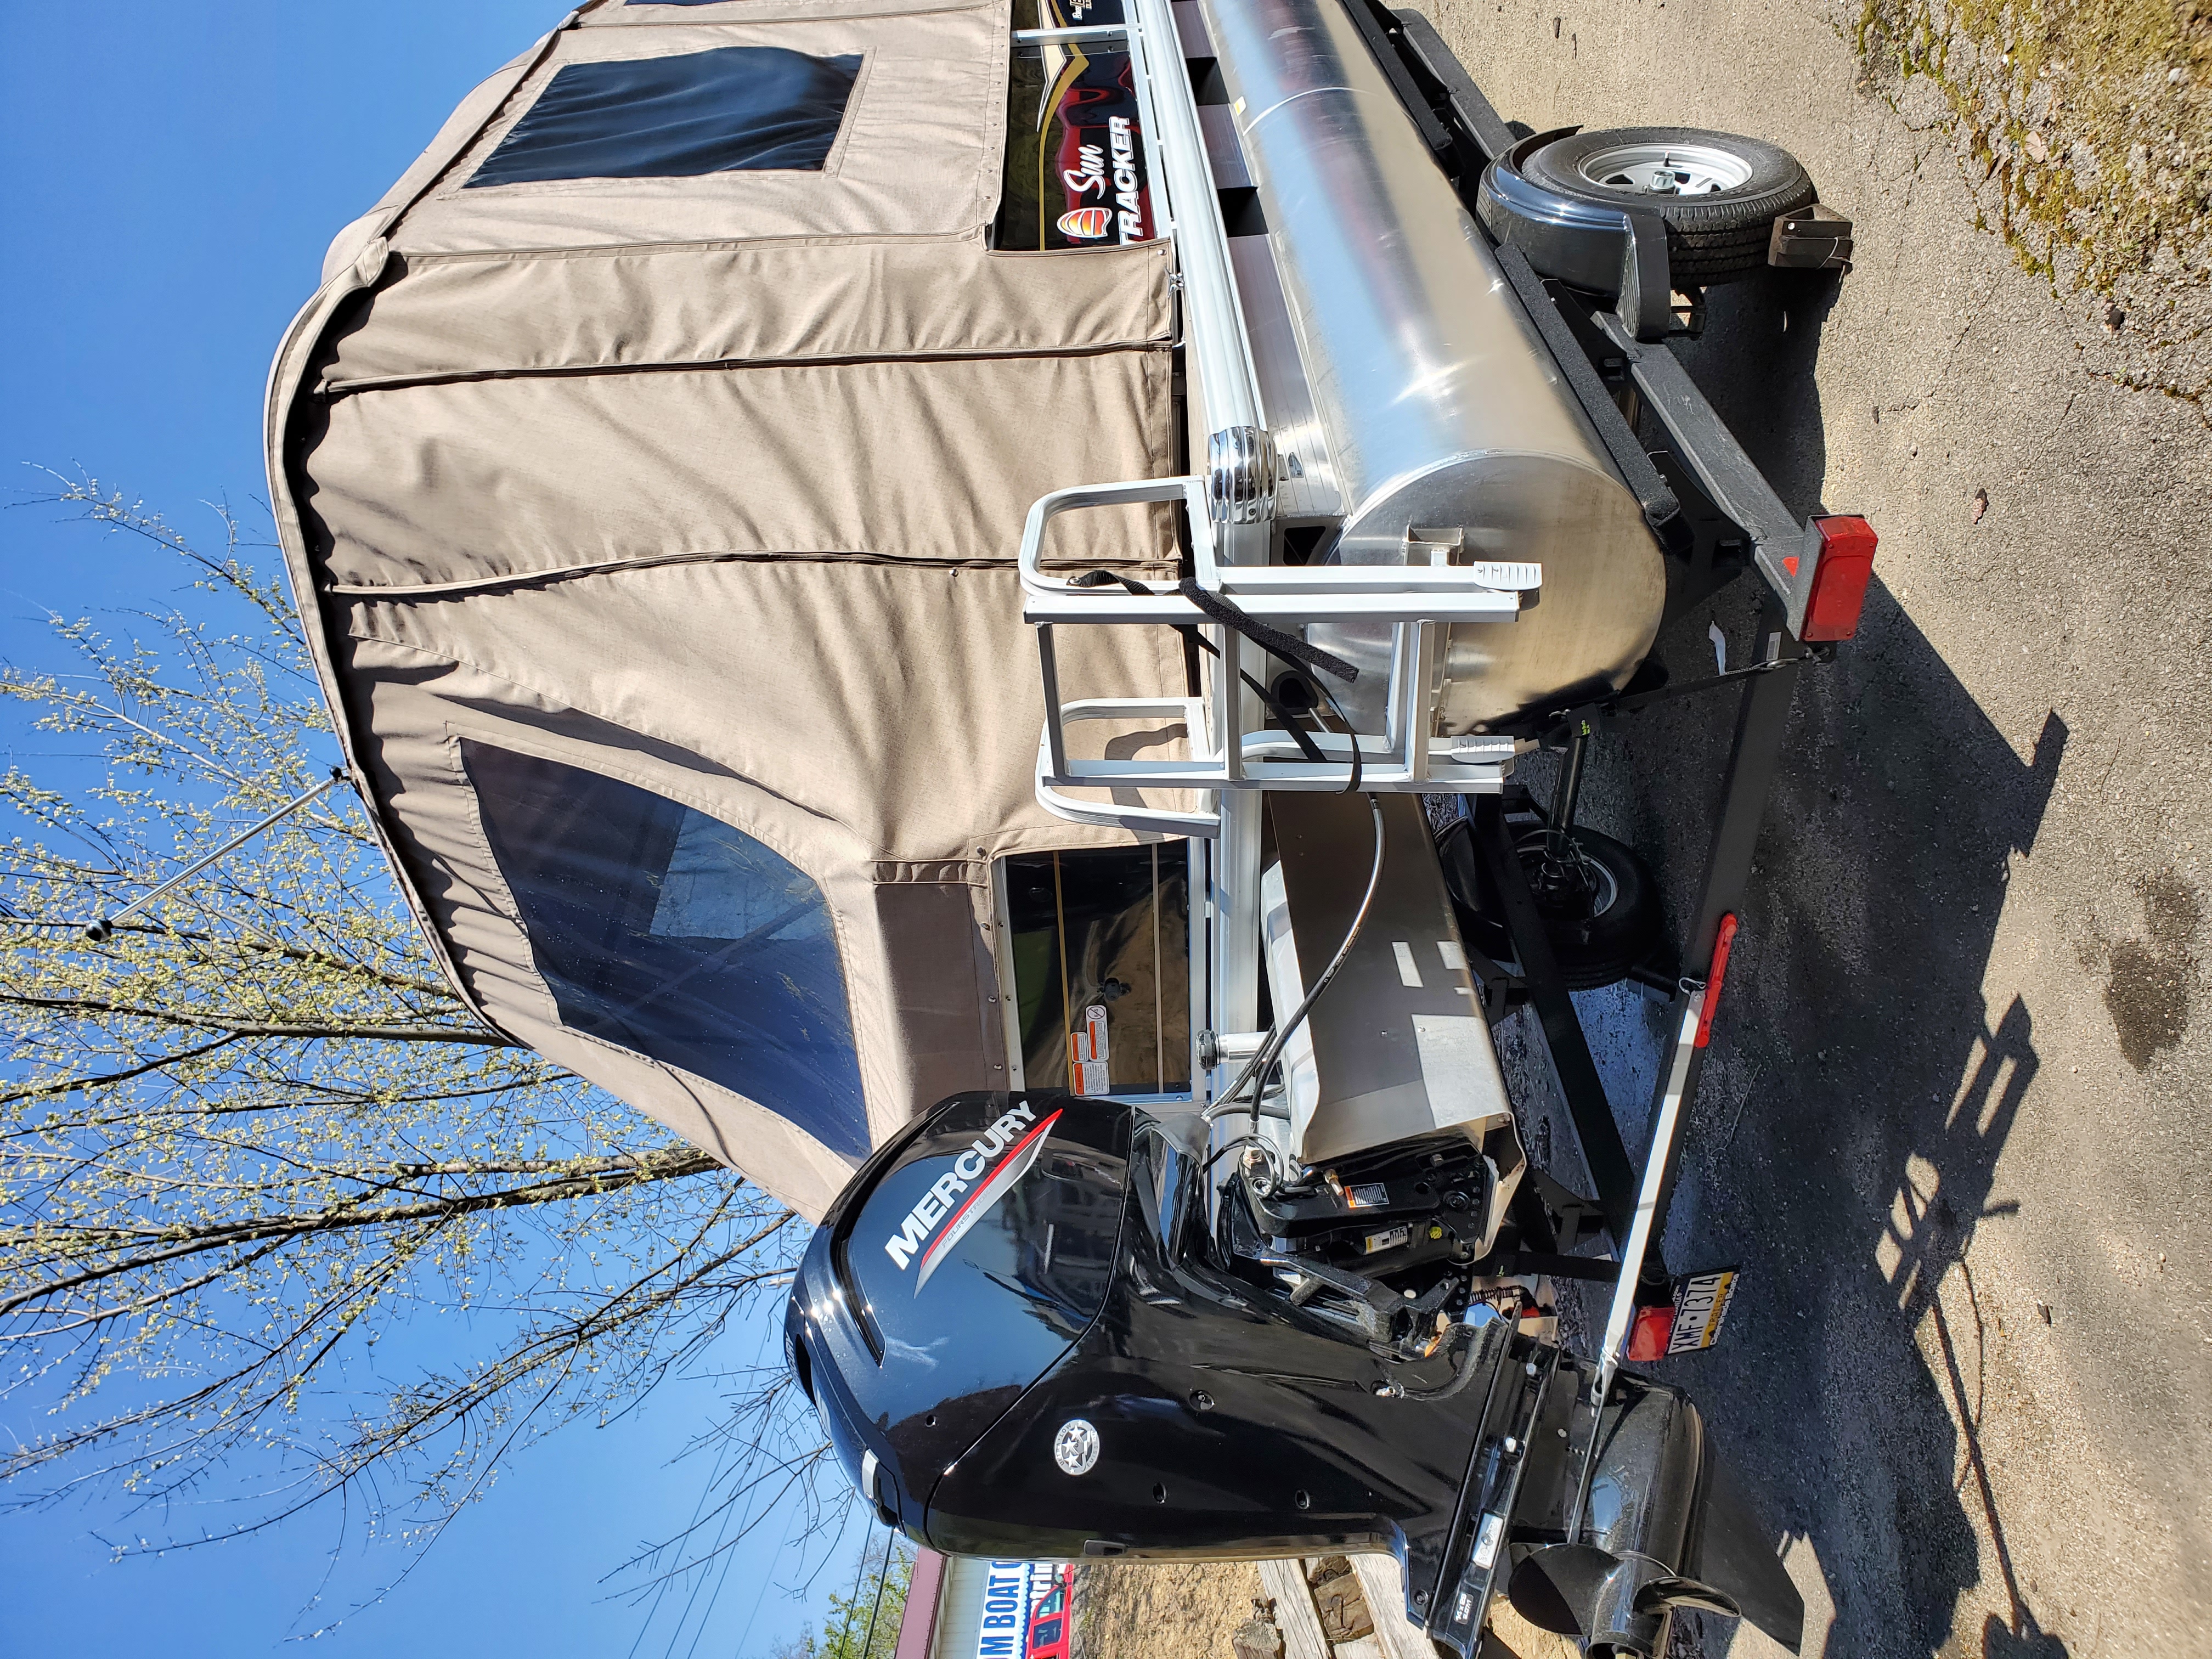 2021 18 foot Sun Tracker Bass Buggy DLX Pontoon Boat for sale in Penn Hills, PA - image 5 